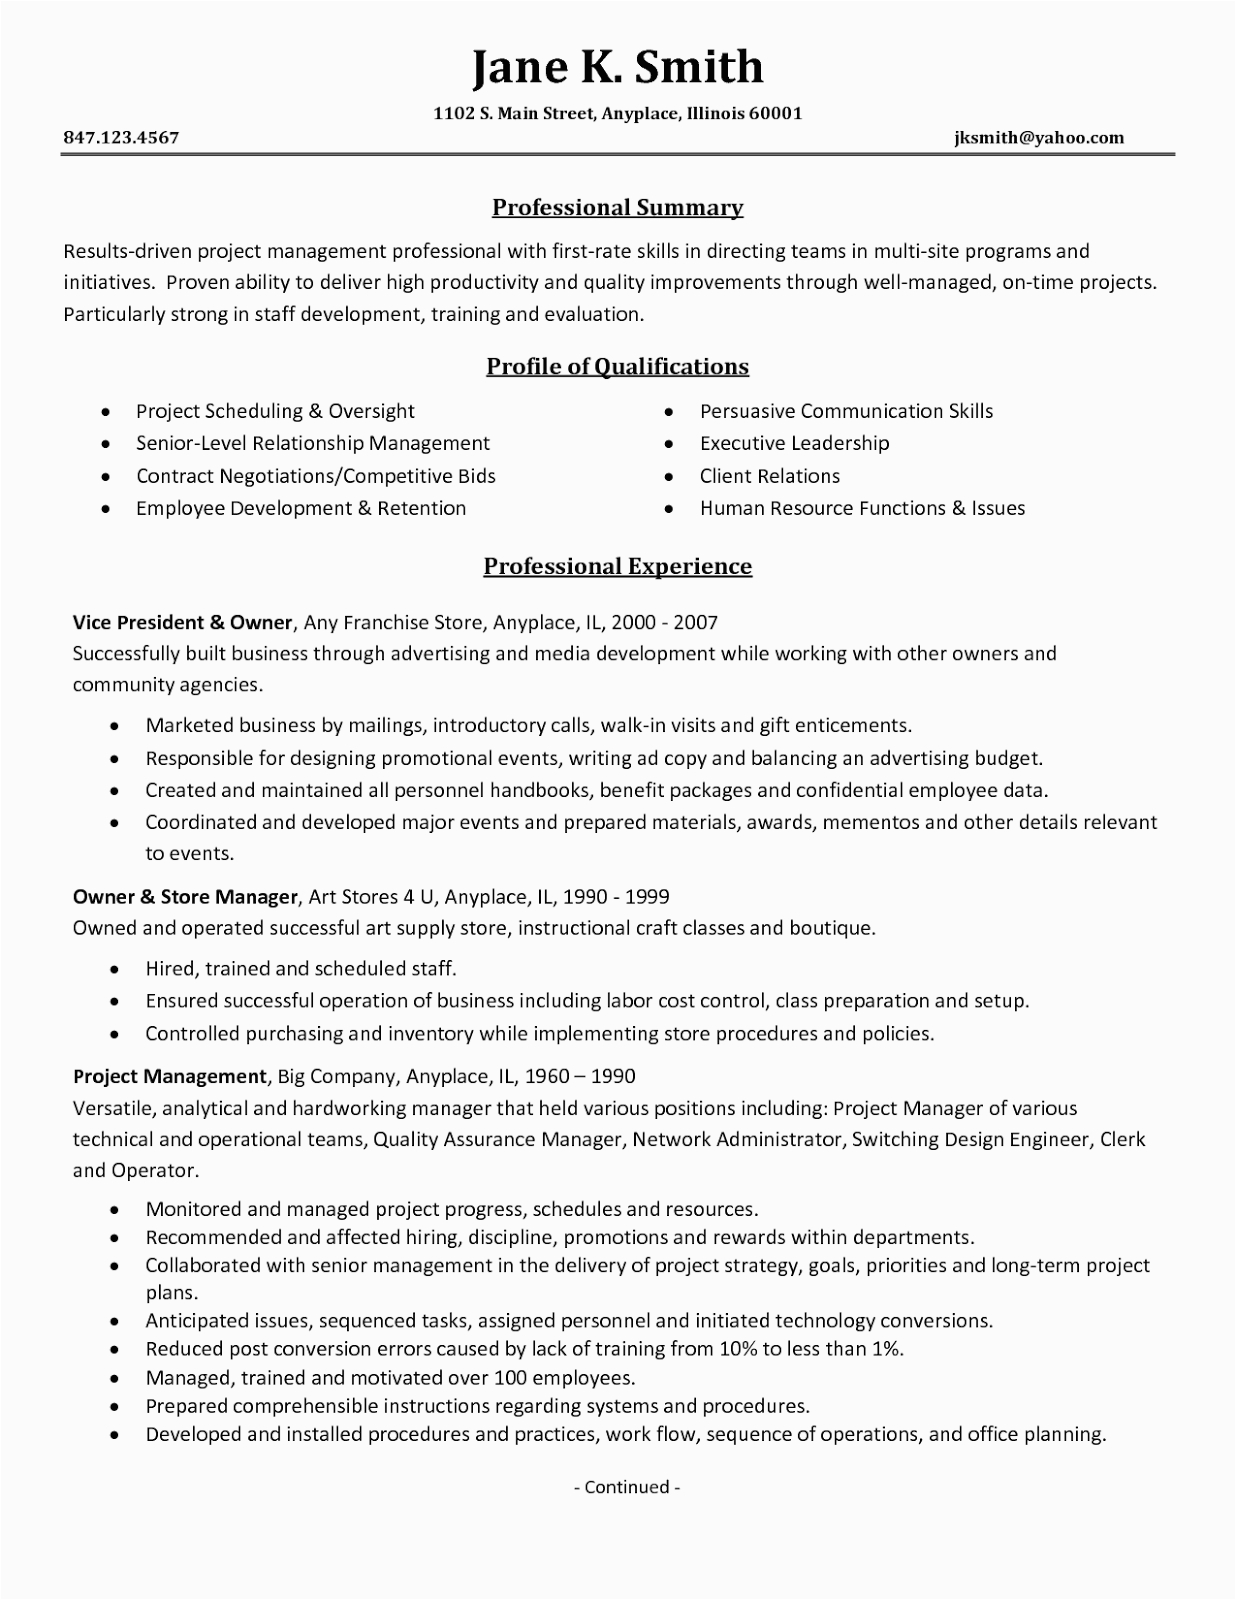 Sample Resume for Project Management Professional Project Management Resume Samples 2016